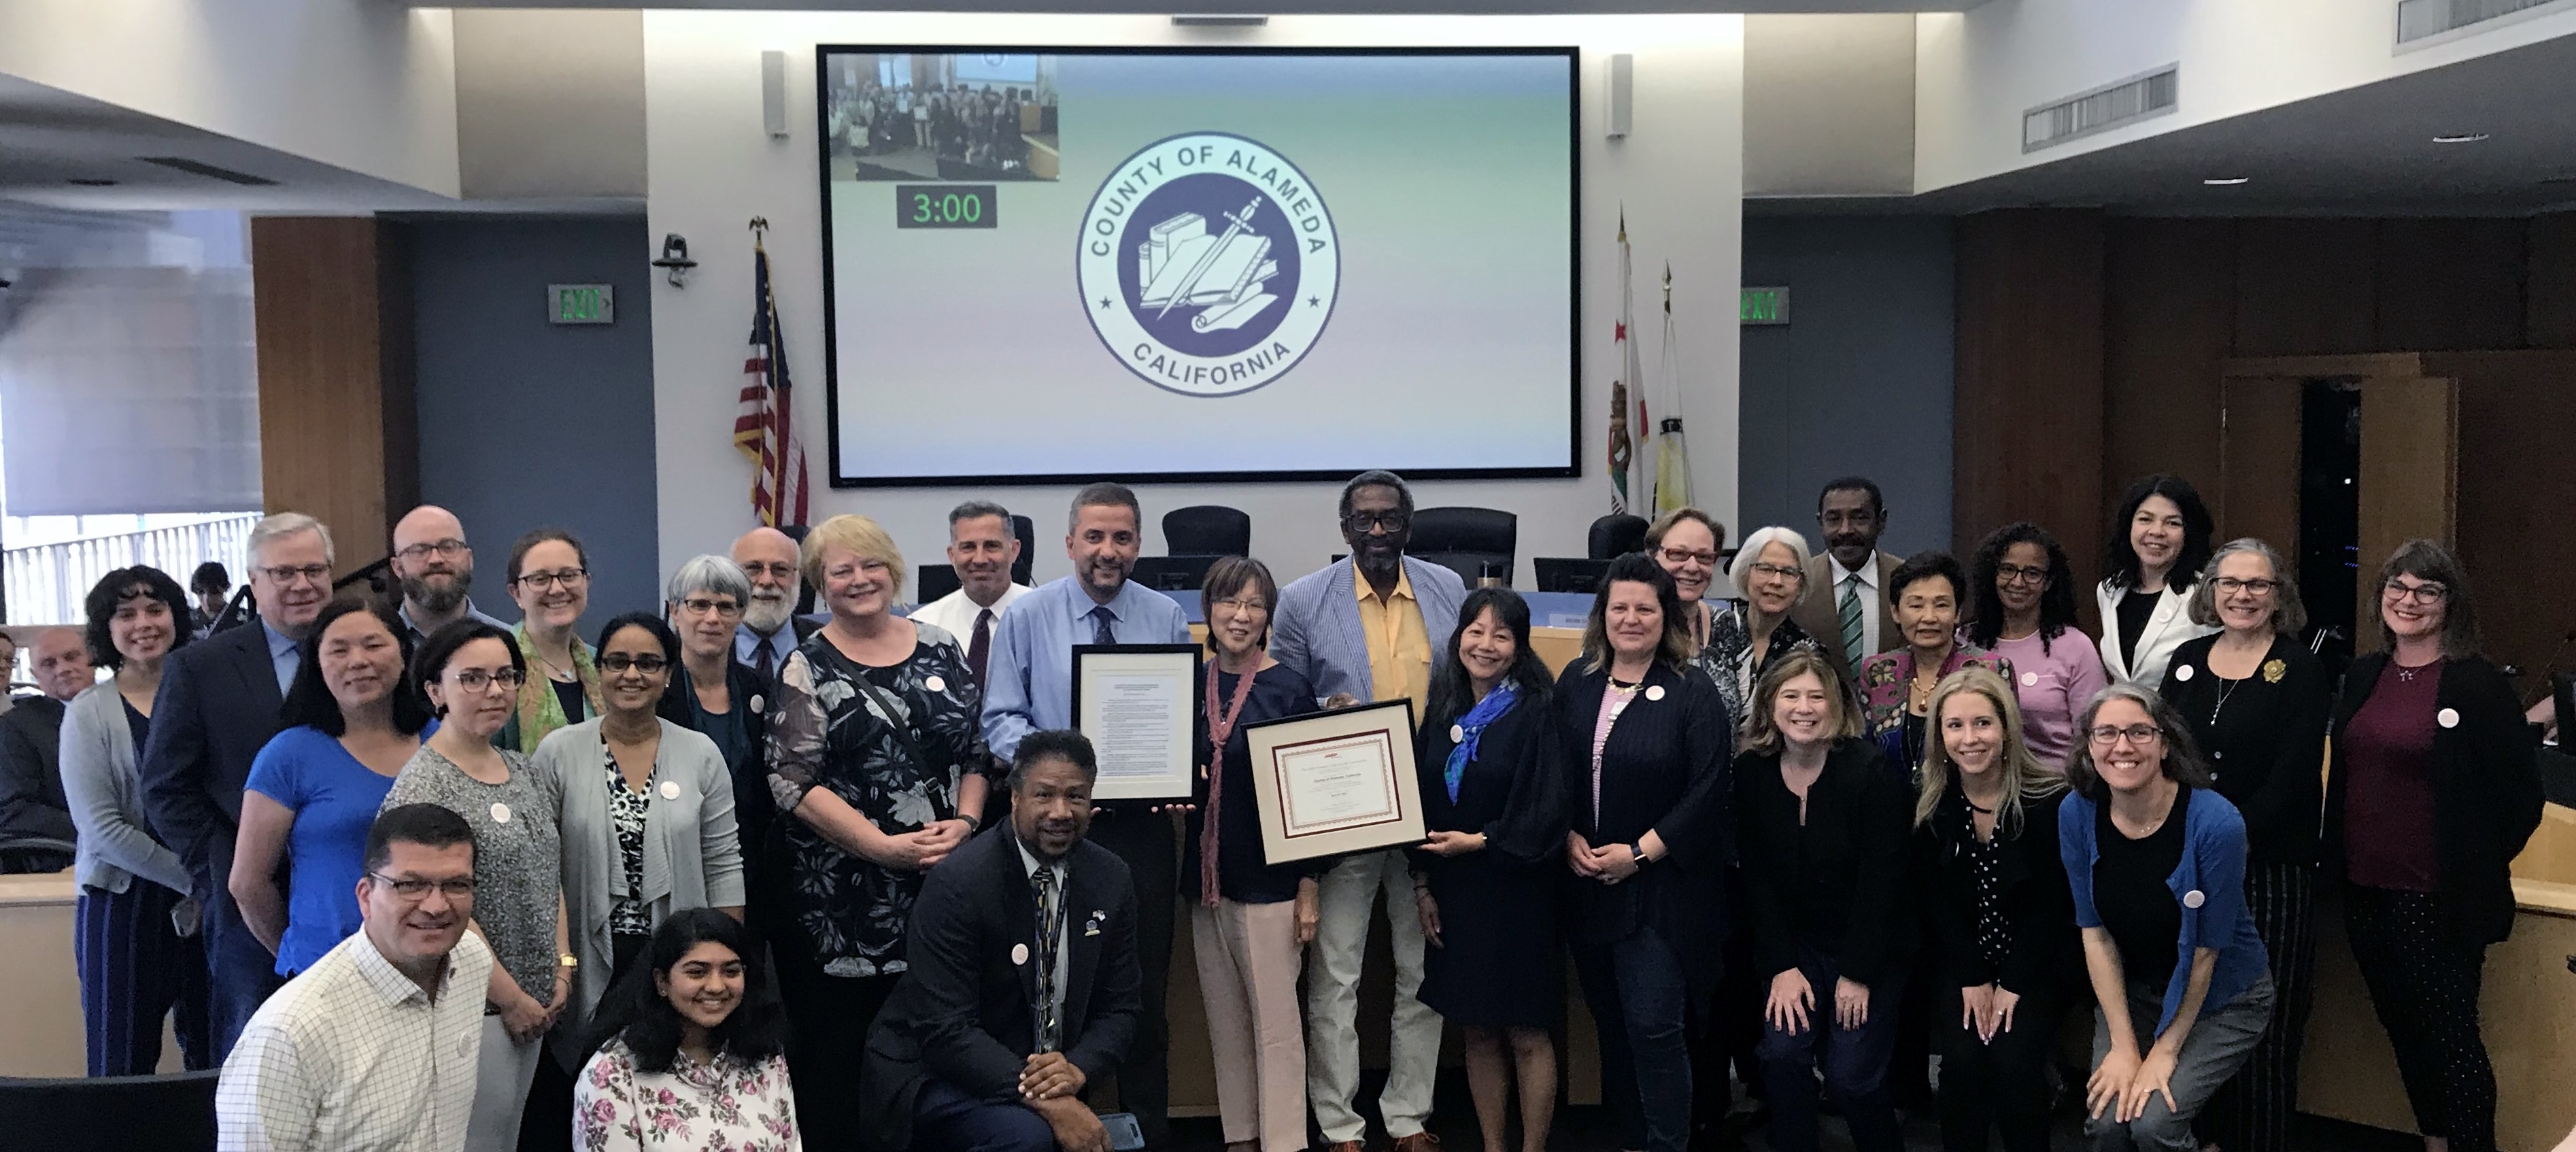 presentation by AARP of Age-Friendly County Certificate  and of framed Board Resolution on 6/14/19